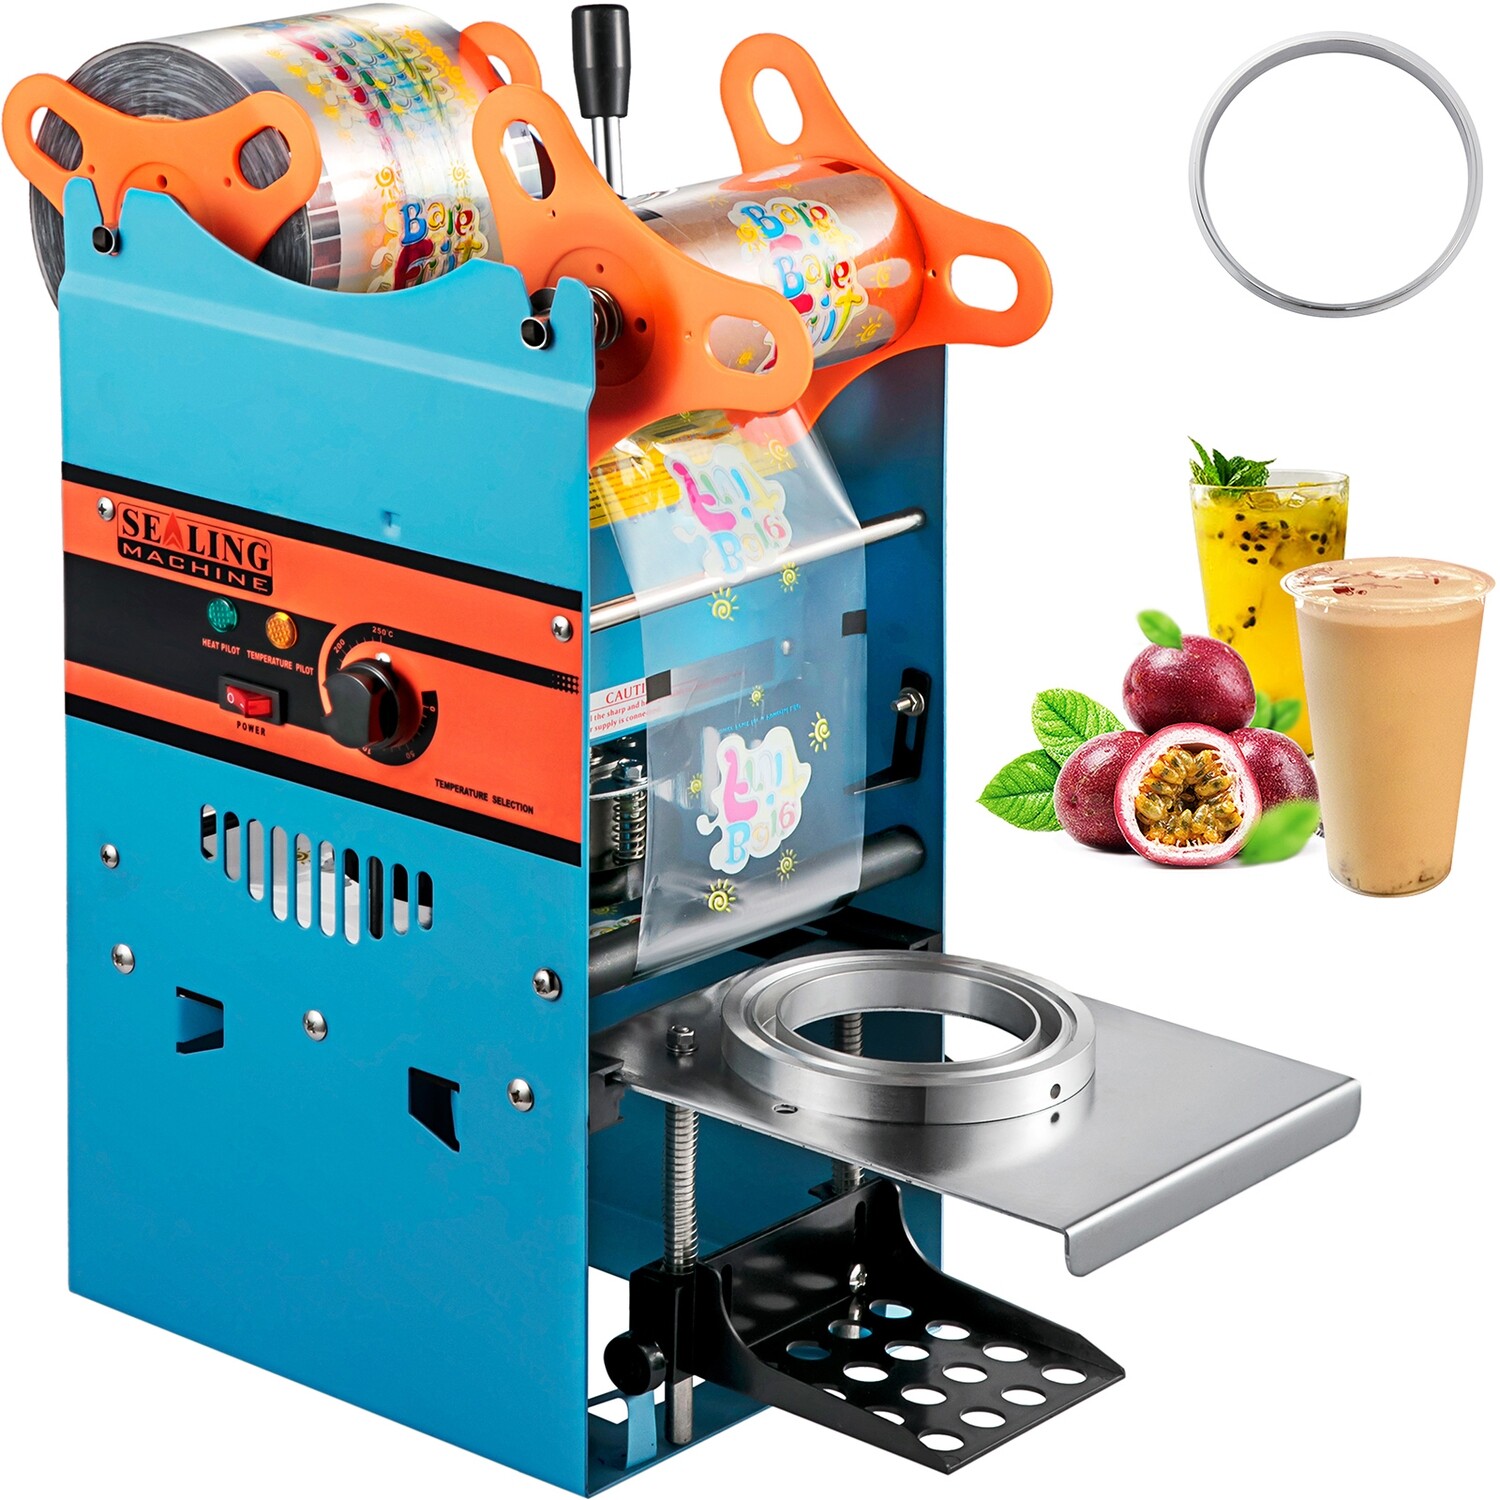 Tea Cup Sealing Machine by Hand Blue Manual Cup Sealer 300-500 Cups/Hour